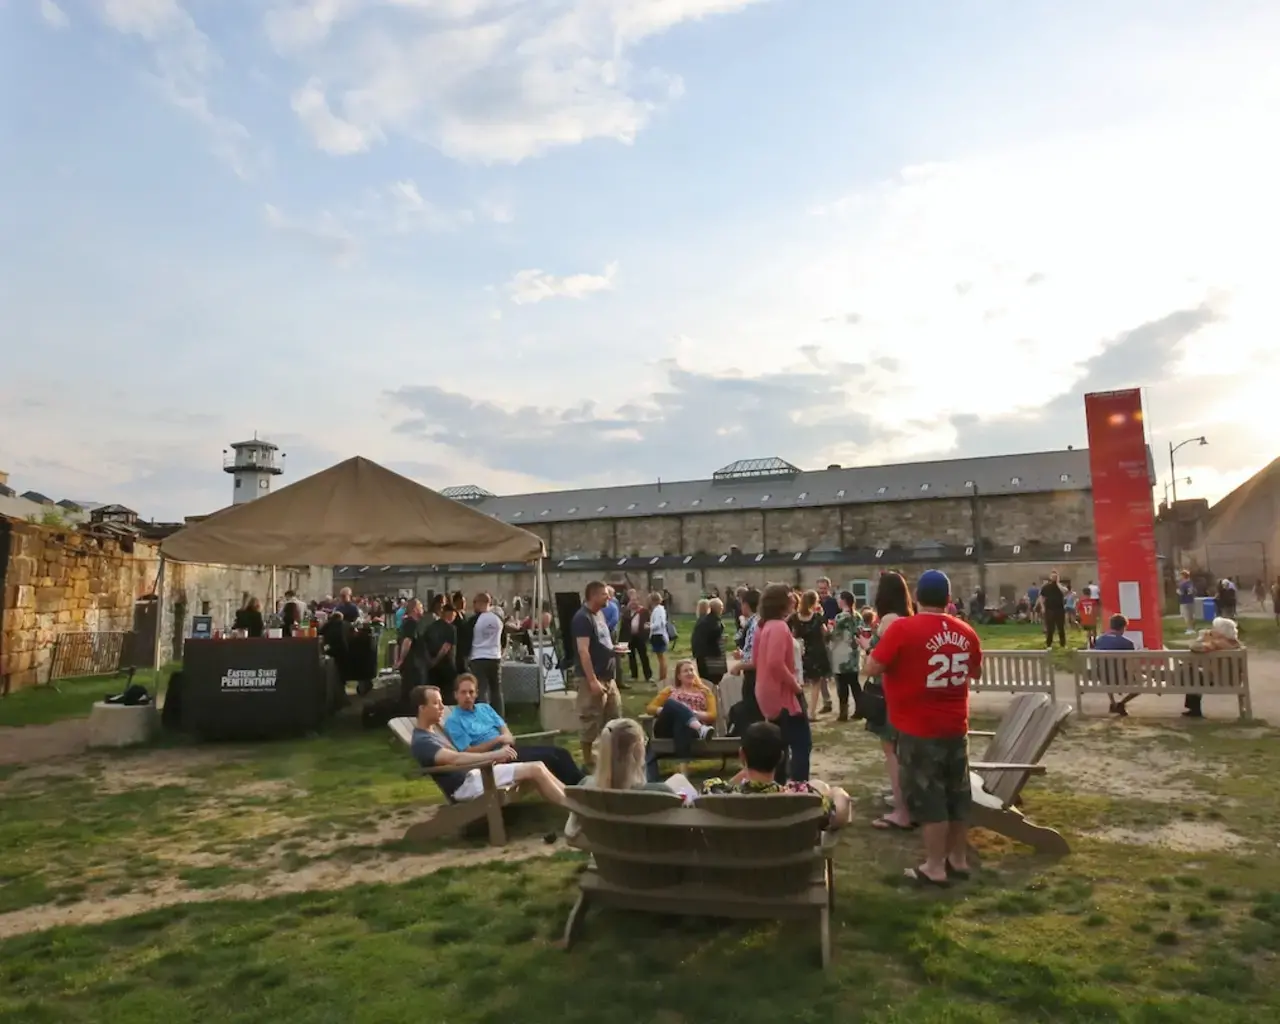 Visitors gather on Eastern State Penitentiary's baseball field for a season reception celebrating its newest site-specific artist installations, 2019. Photo courtesy of Eastern State Penitentiary.